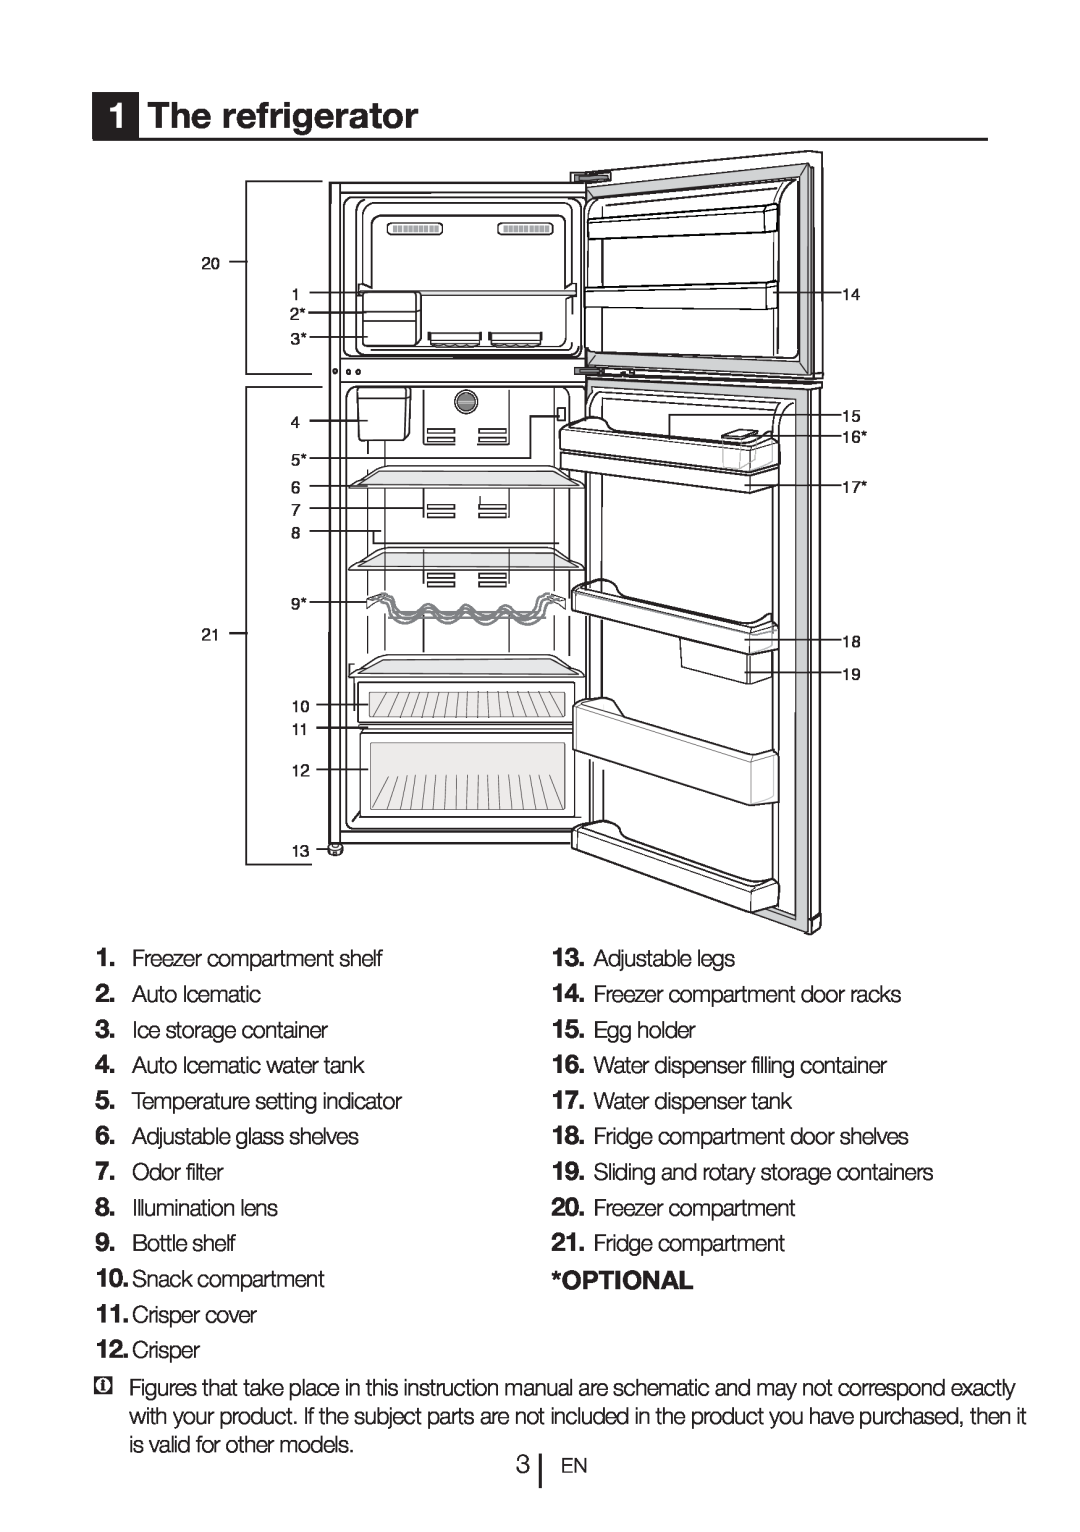 Blomberg DND 9977 PD manual 1The refrigerator, Optional 